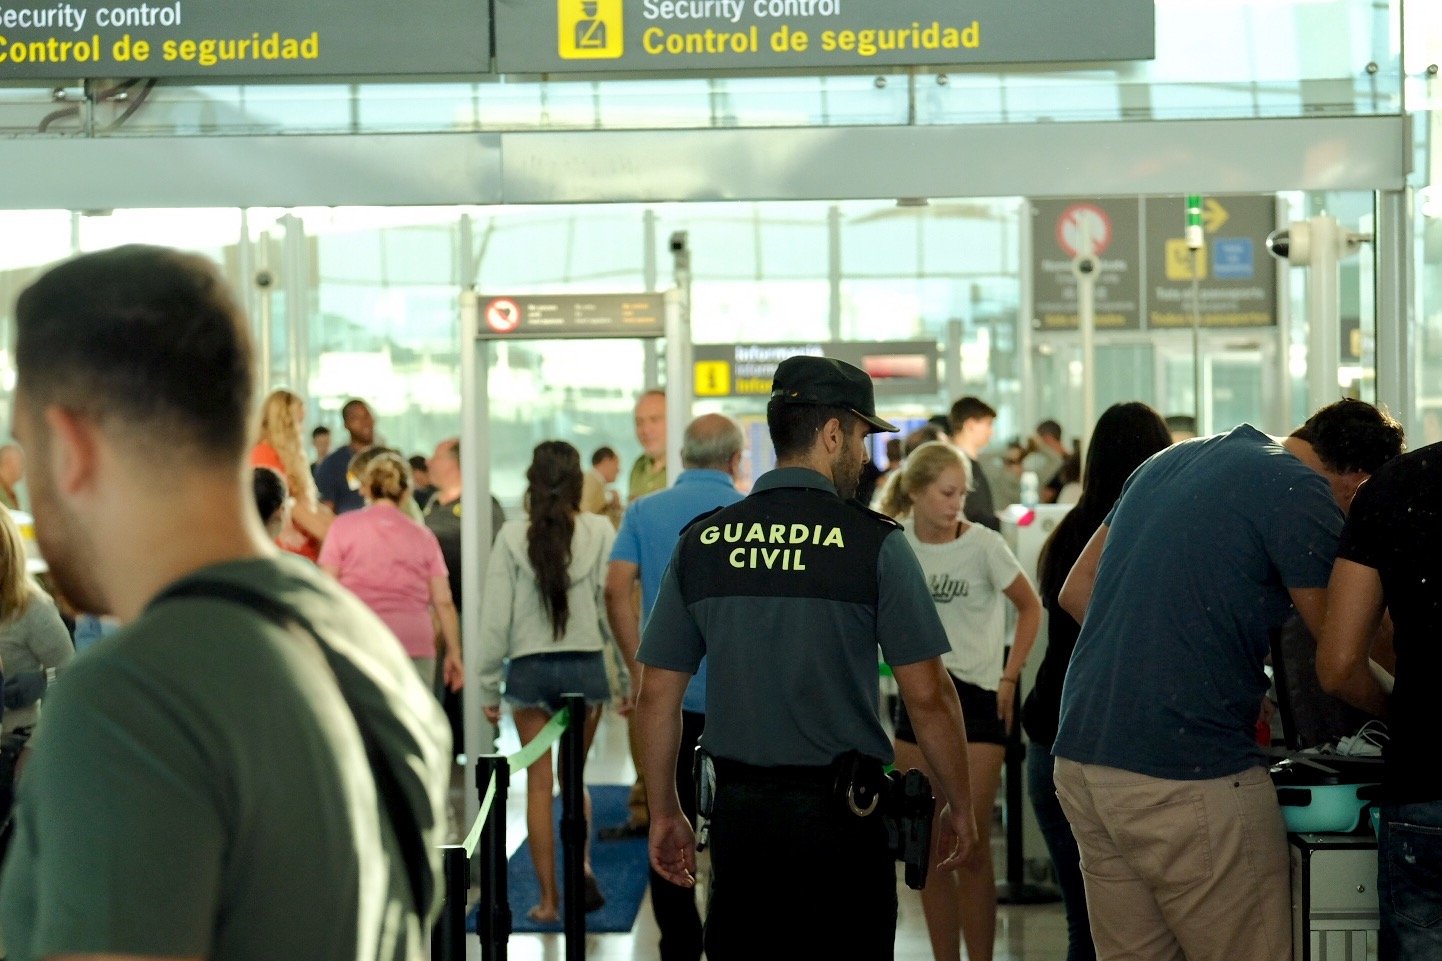 First day of total strike at El Prat: queues at check-in, calm at security control